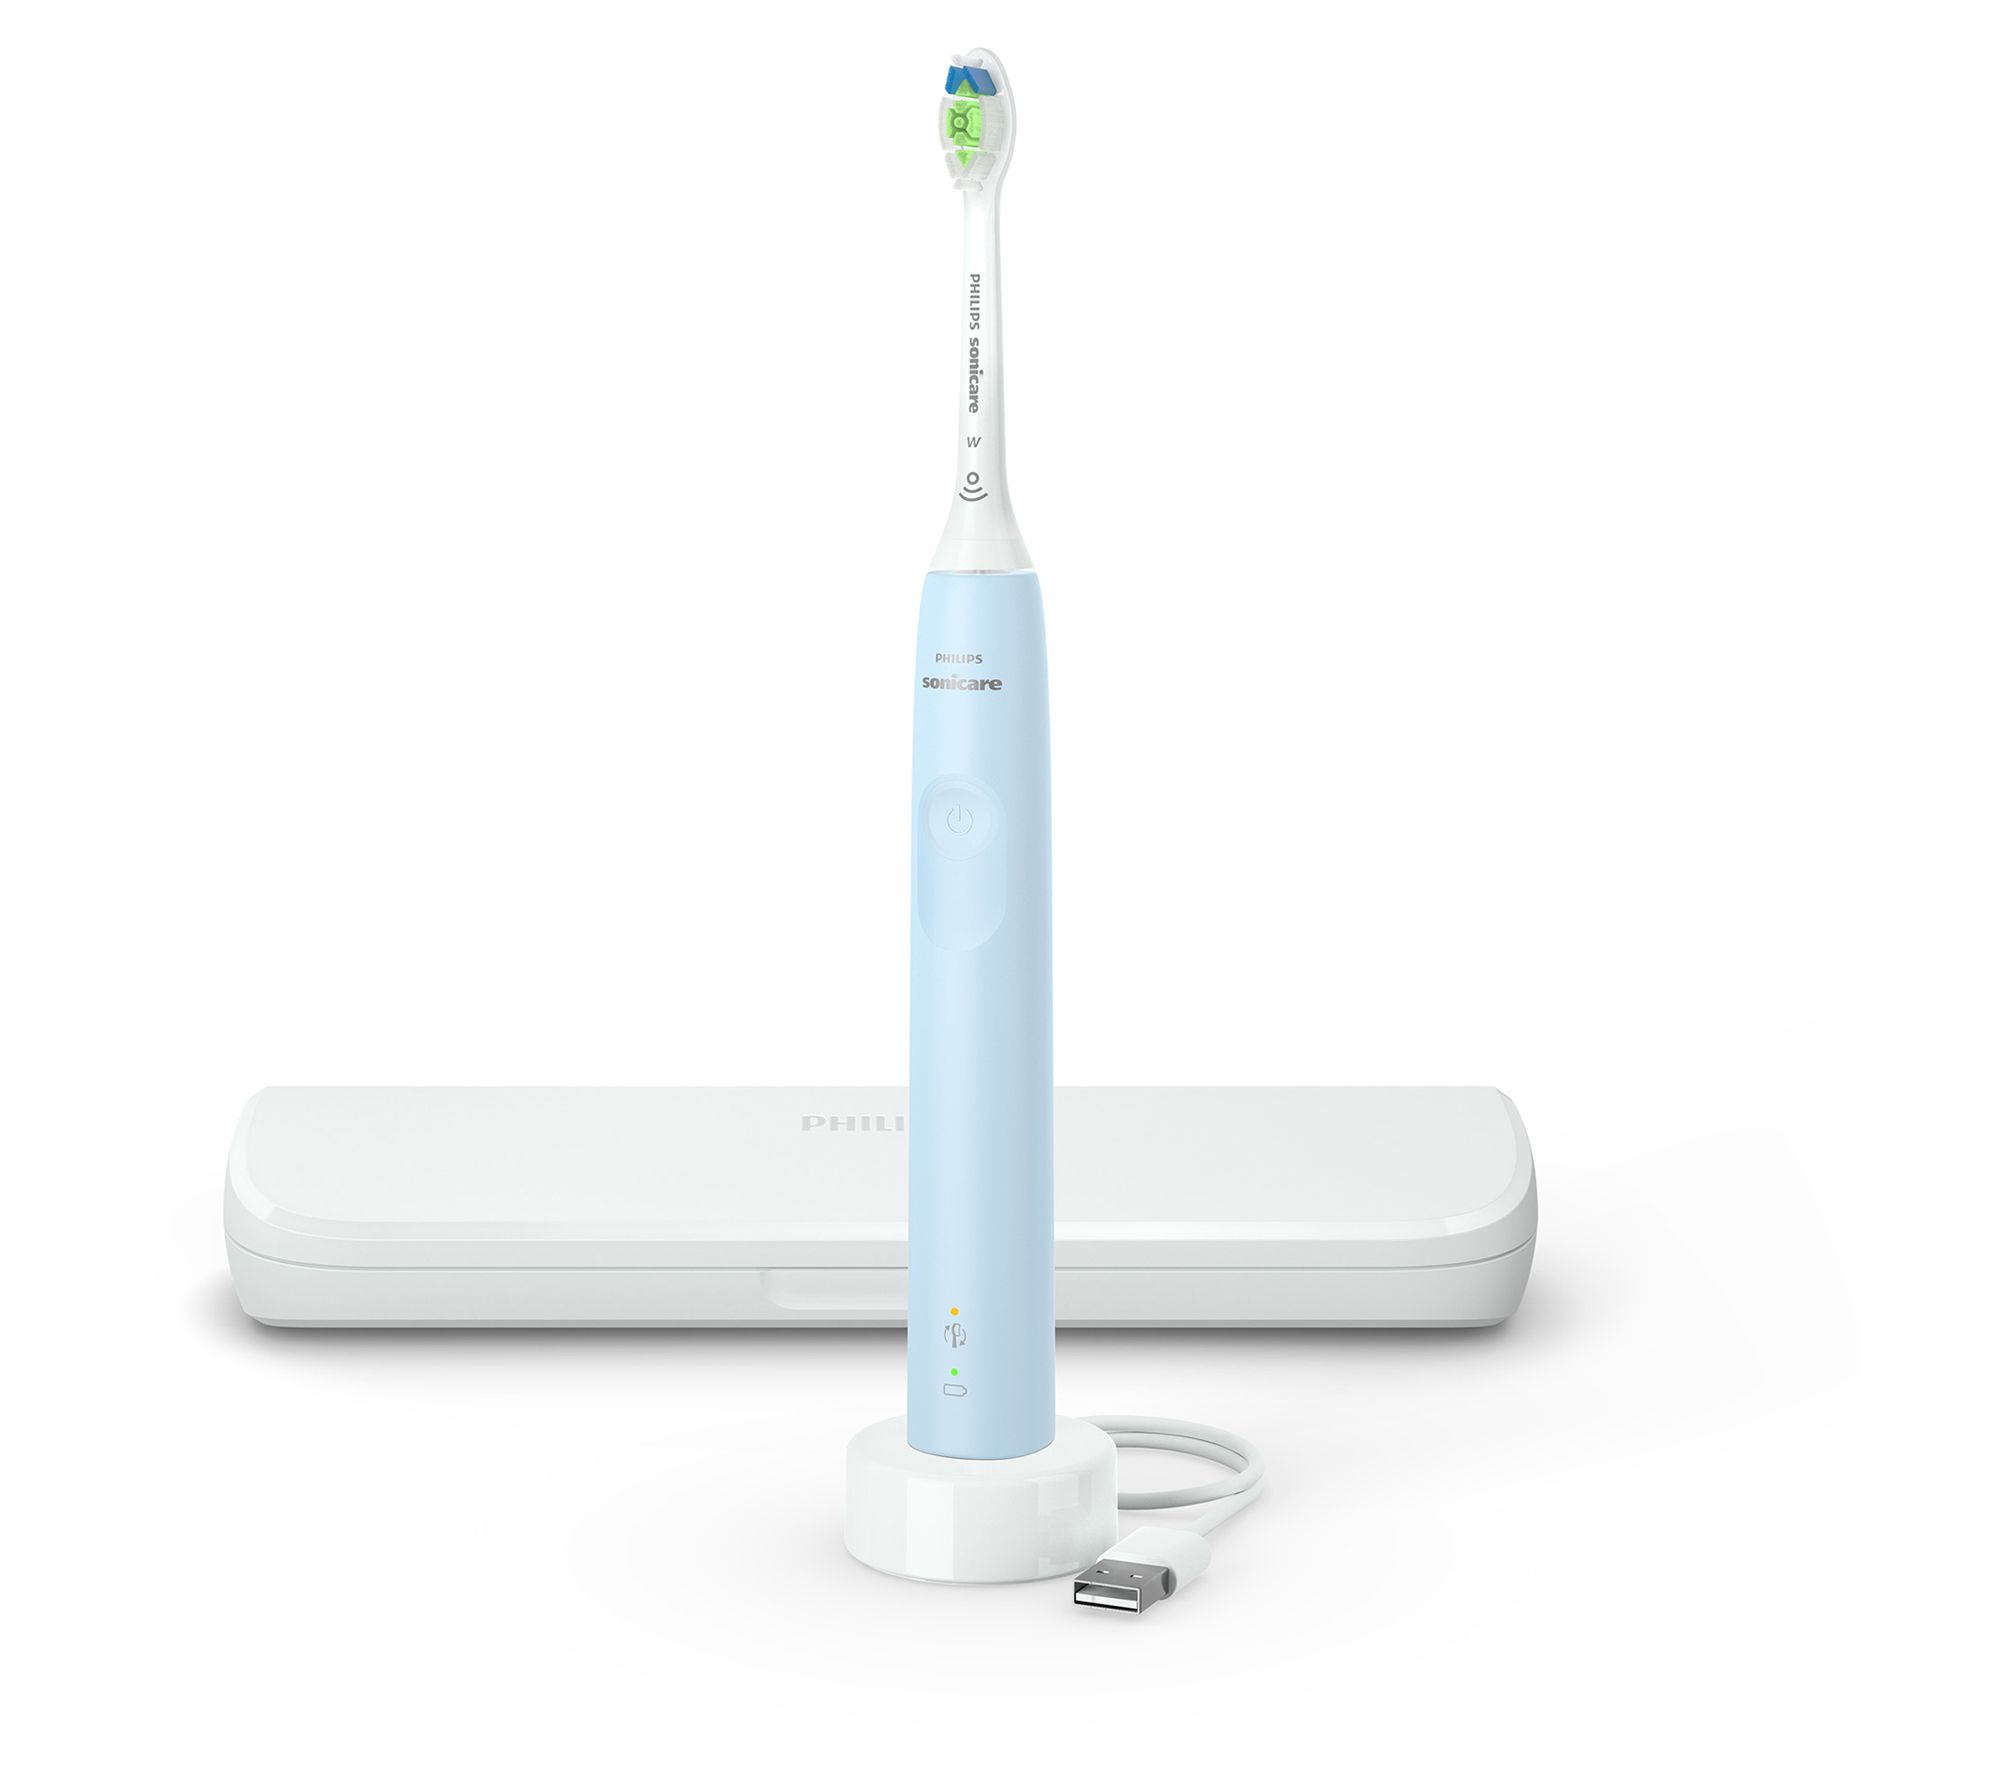 philips-sonicare-4900-series-toothbrush-qvc